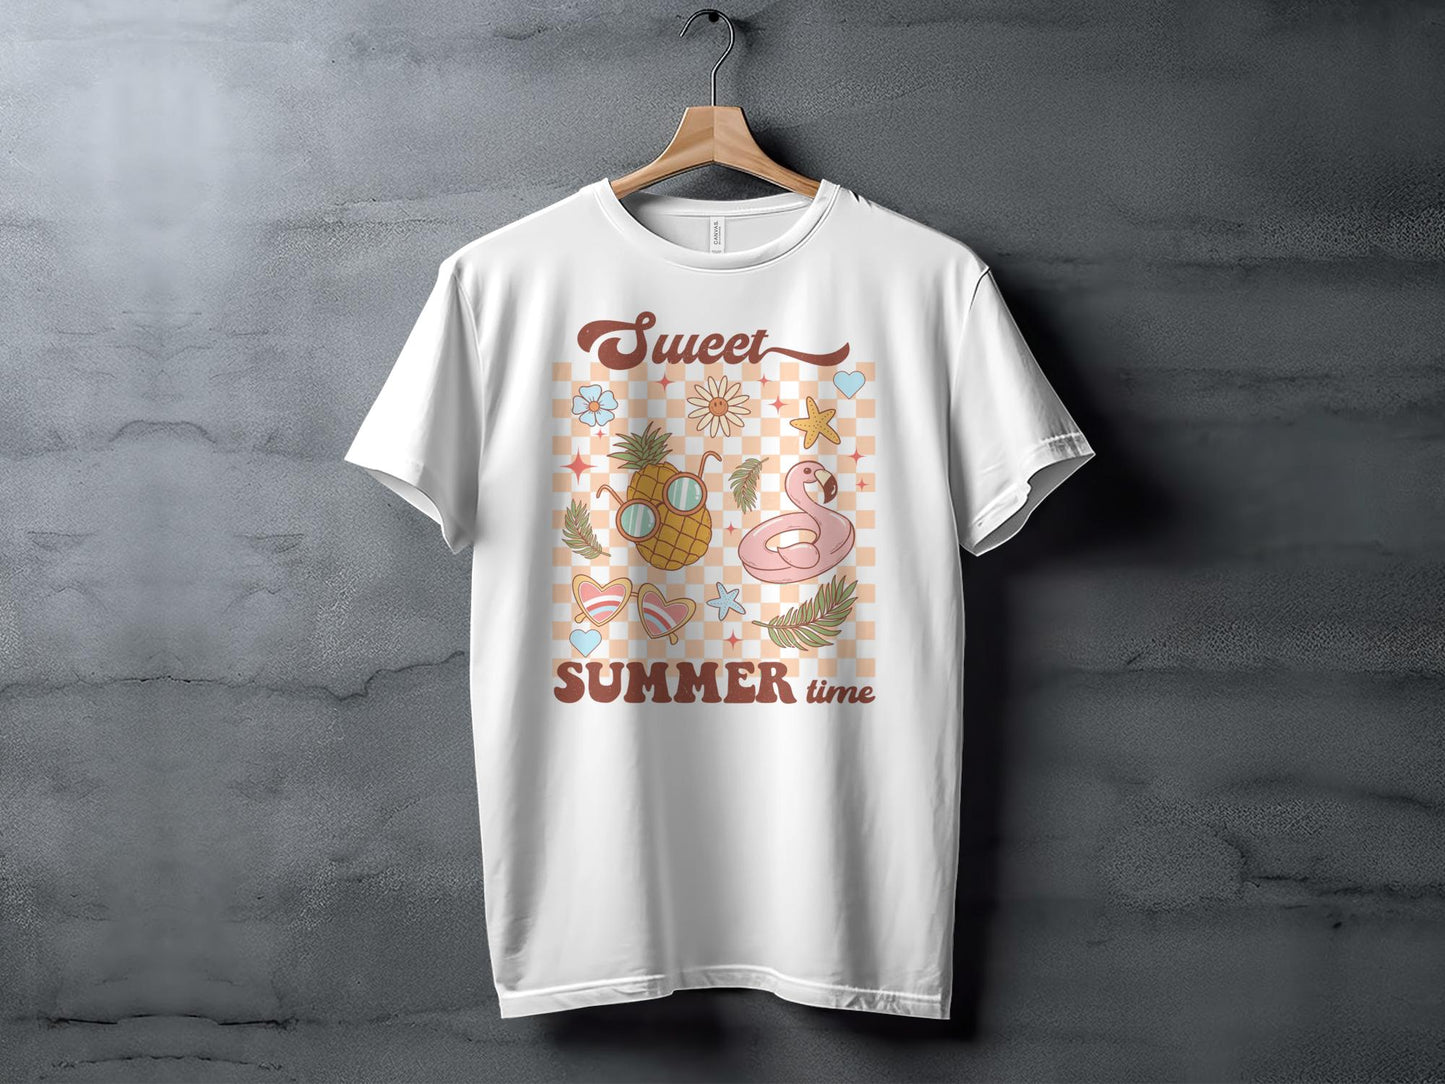 Sweet Summer Time Pineapple and Flamingo Graphic T-Shirt, Vintage Inspired Casual Beach Tee, Unisex Tropical Top